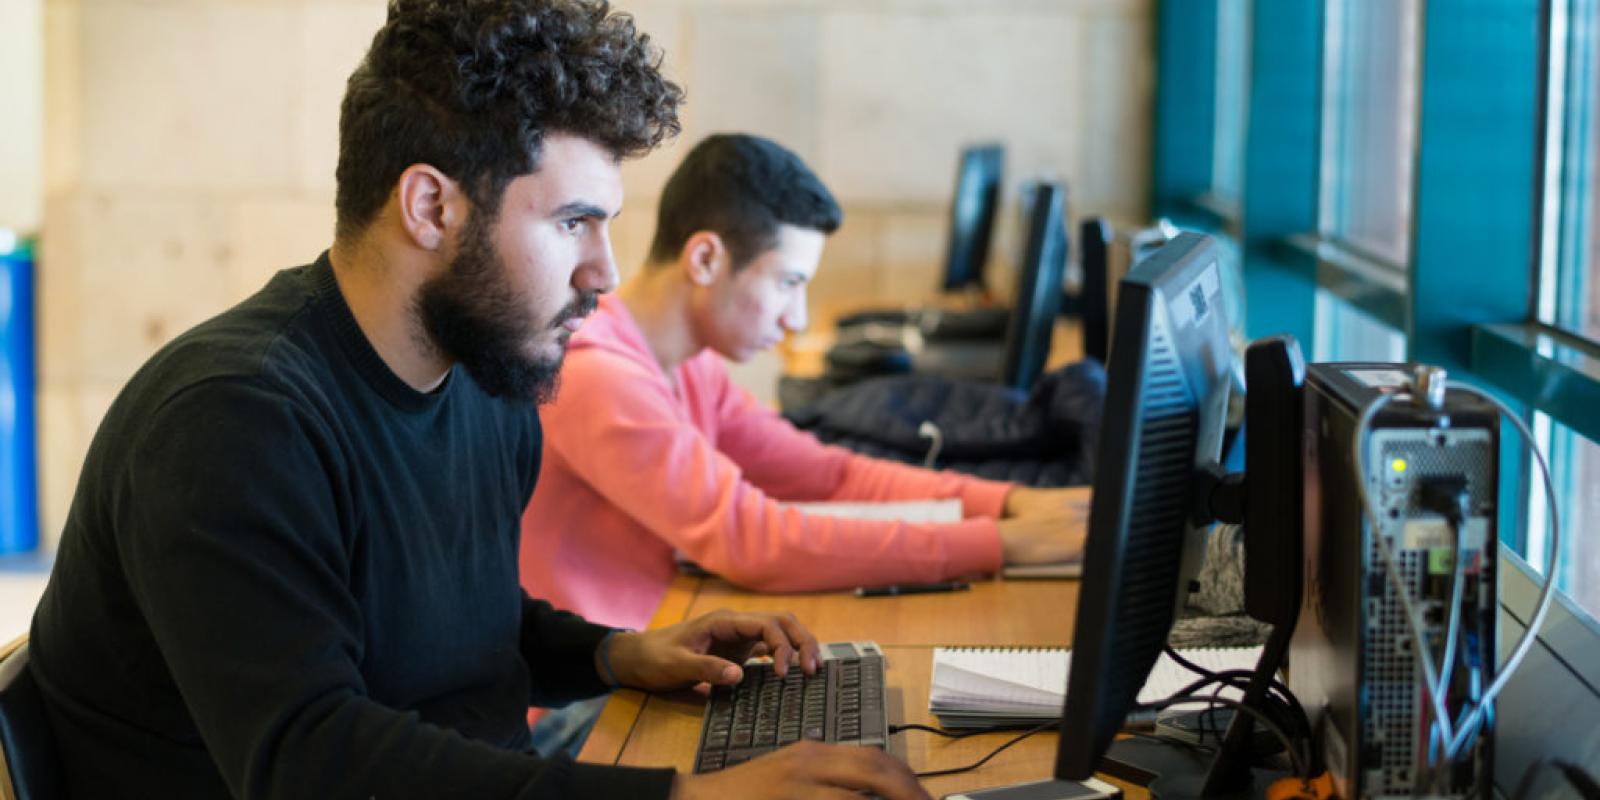 AUC students on the computers in the library 